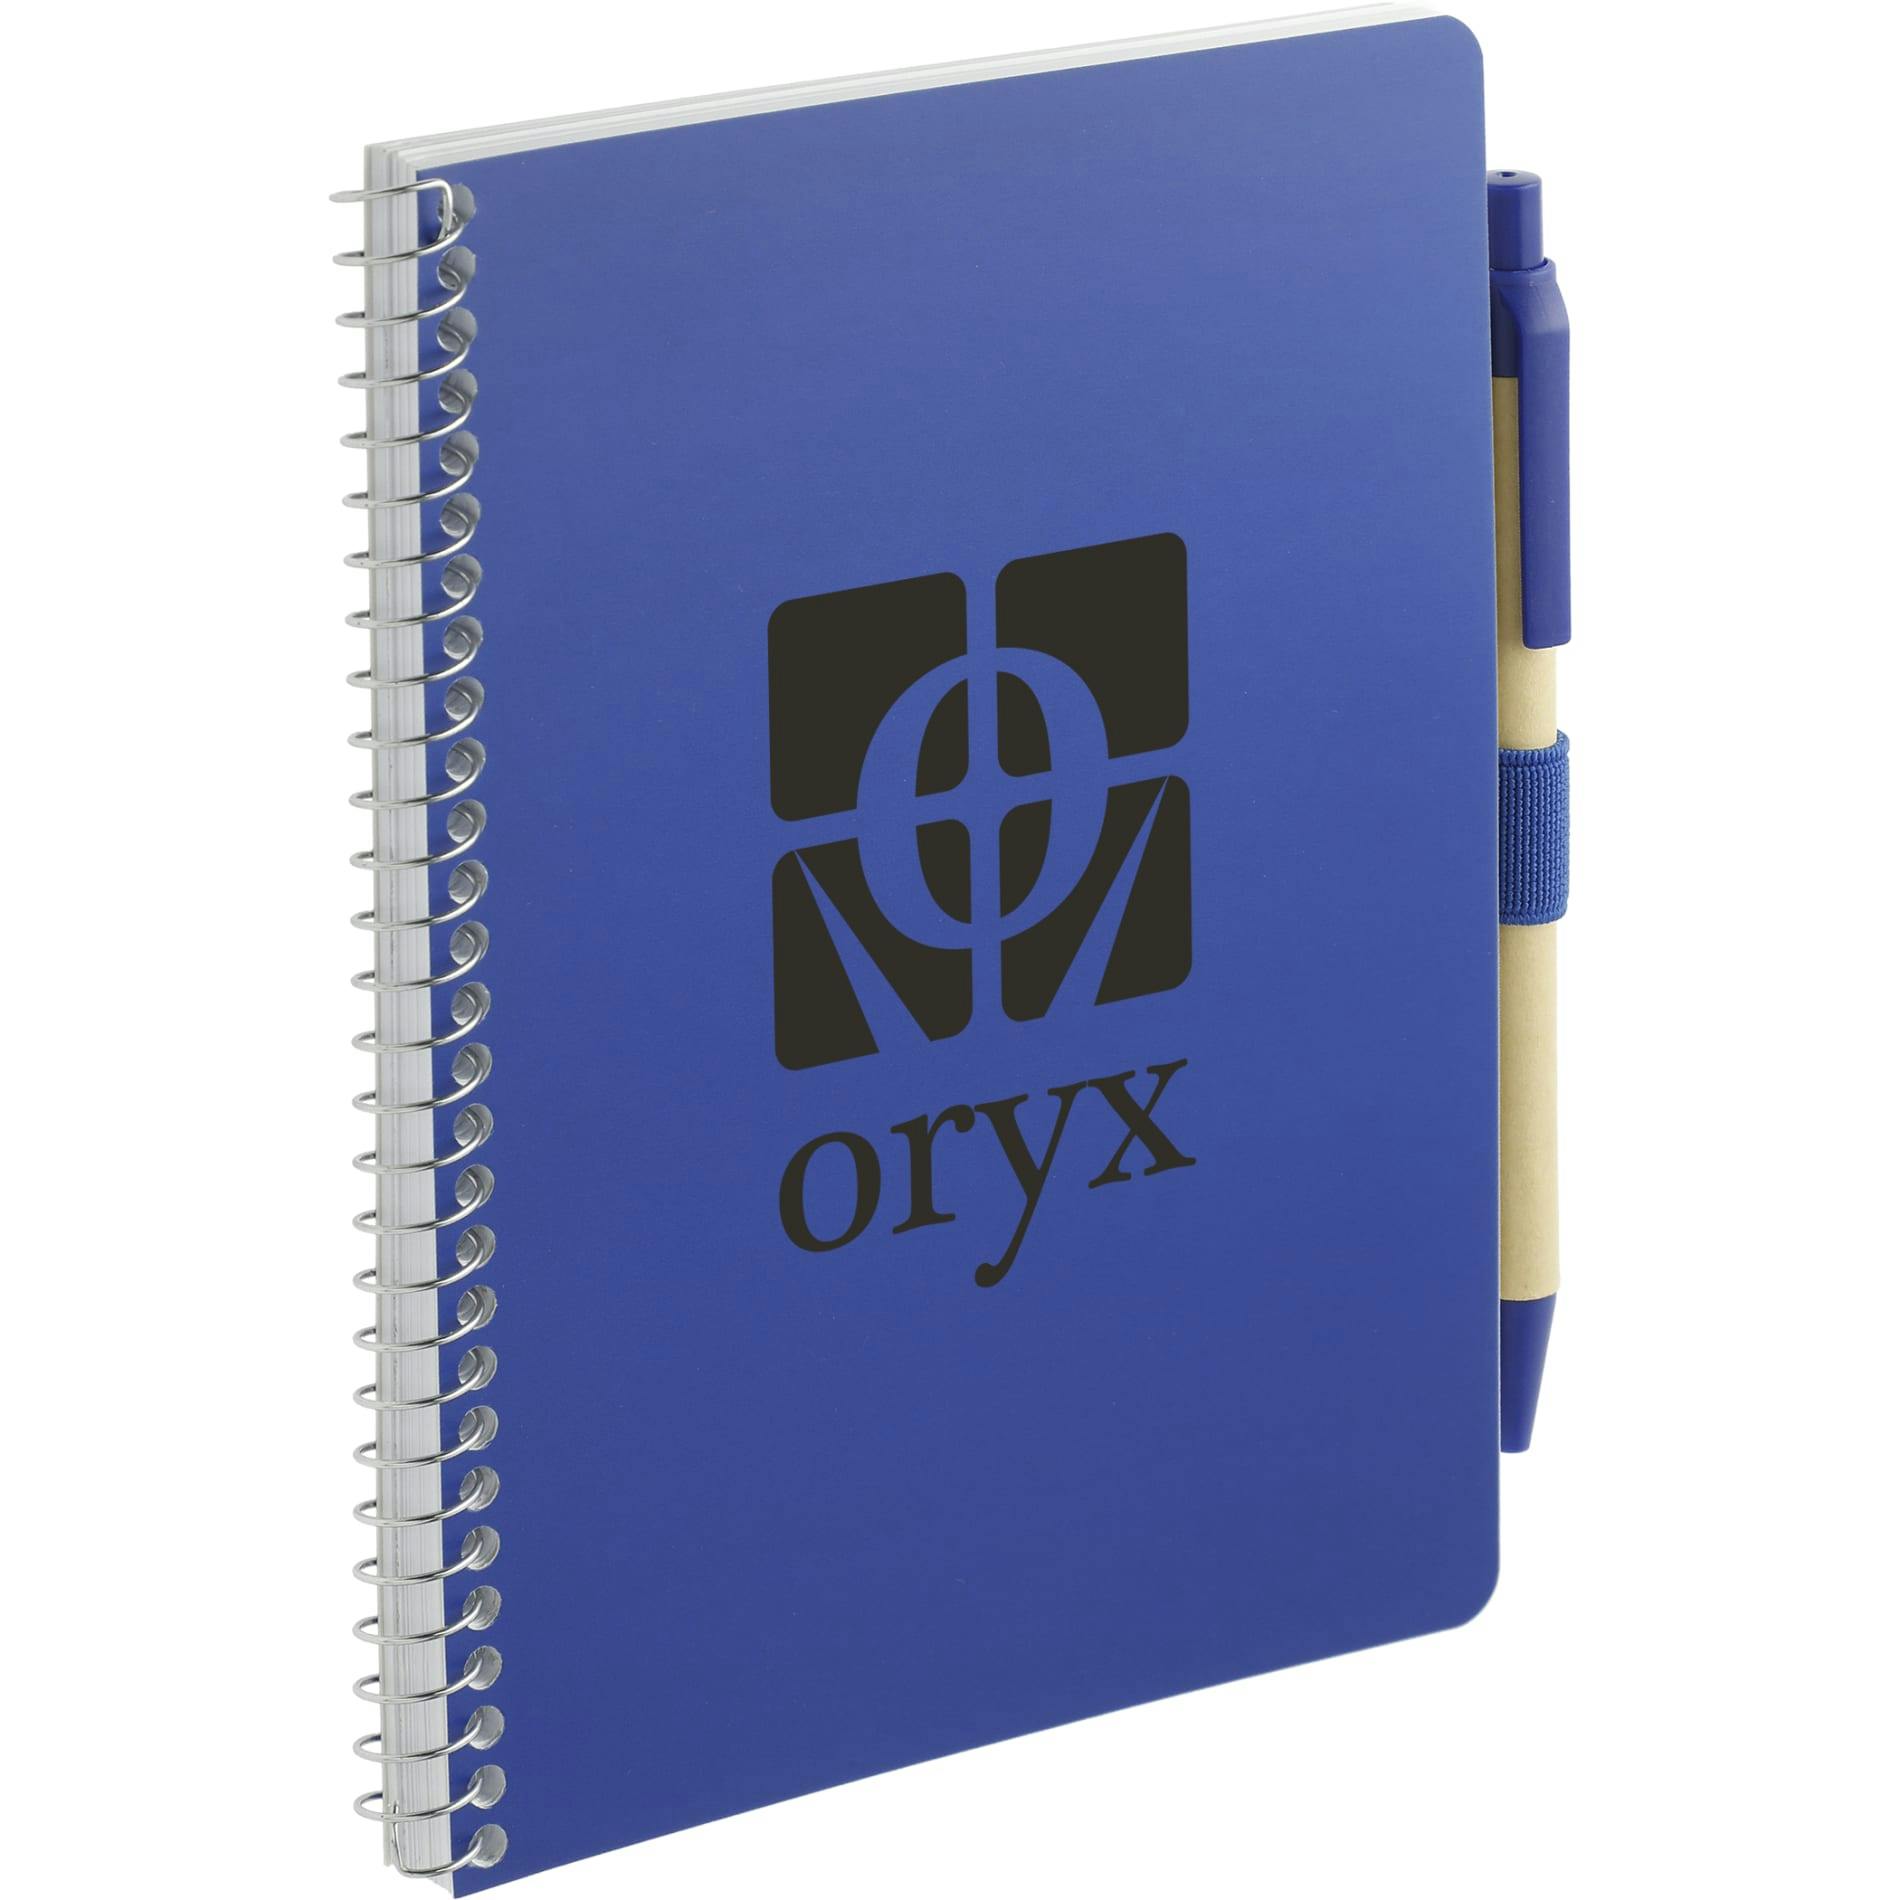 5” x 7” FSC® Mix Spiral Notebook with Pen - additional Image 1